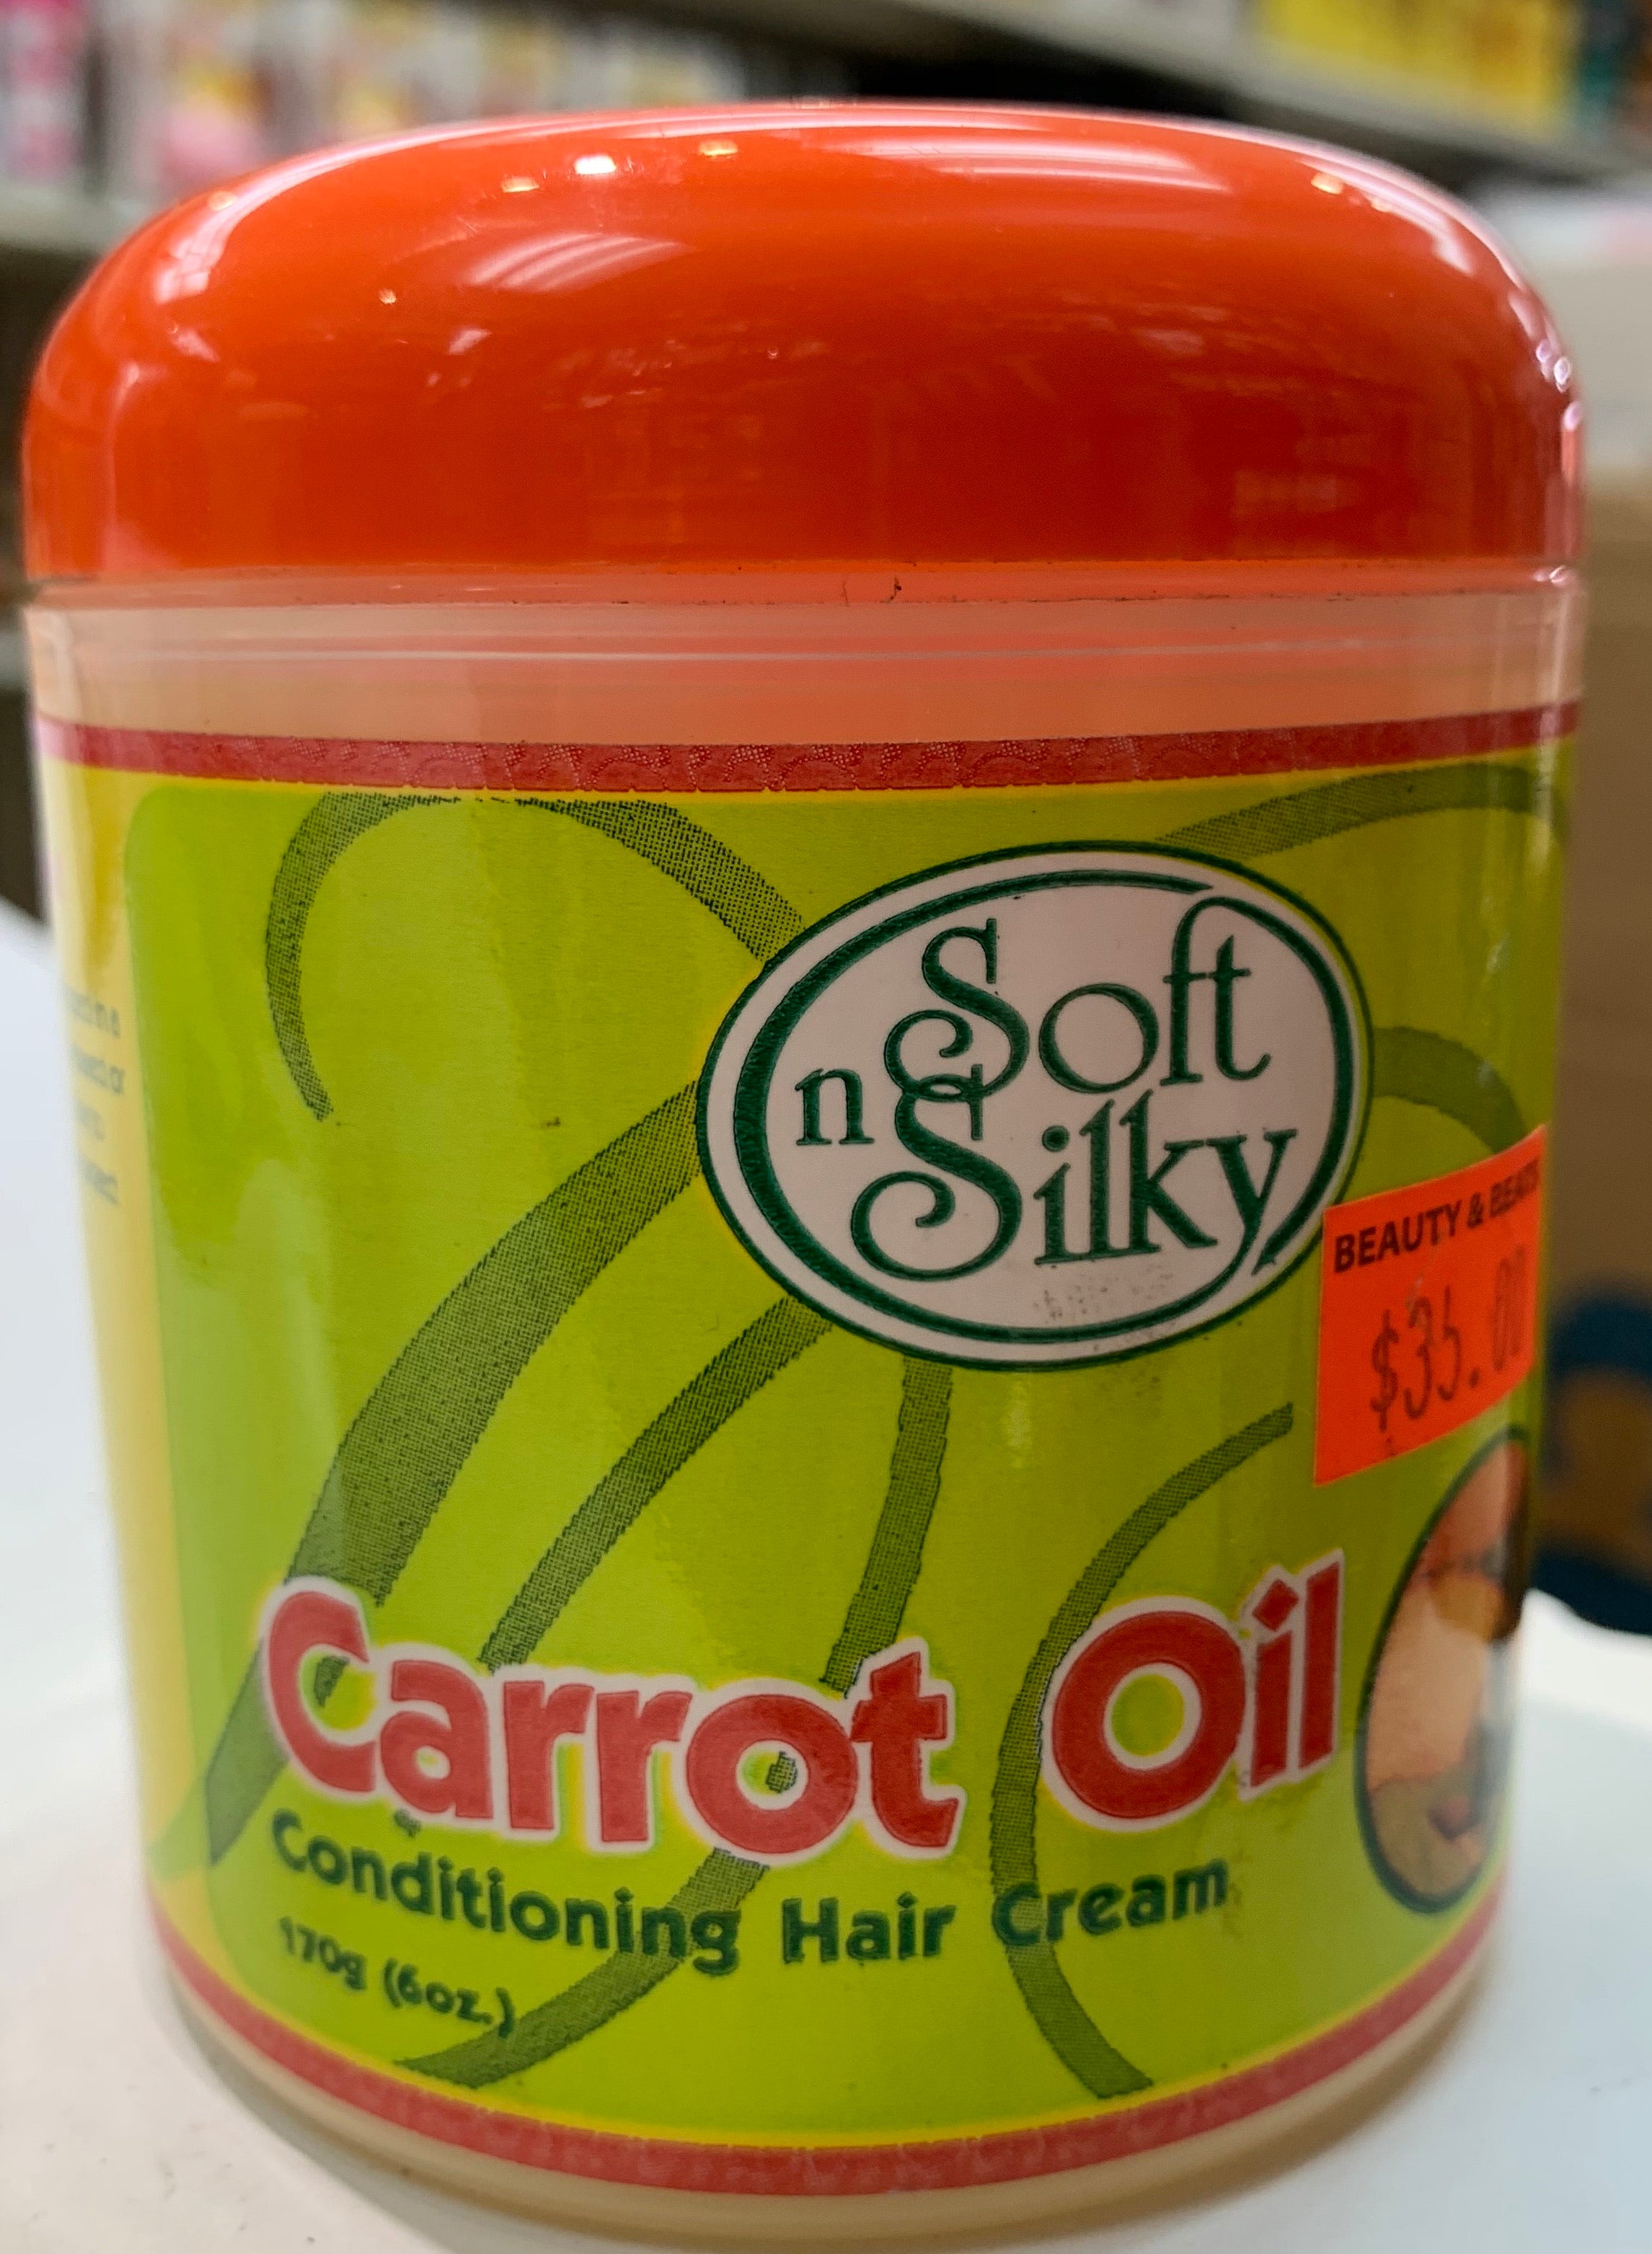 Soft & silky carrot oil conditioning cream 6oz